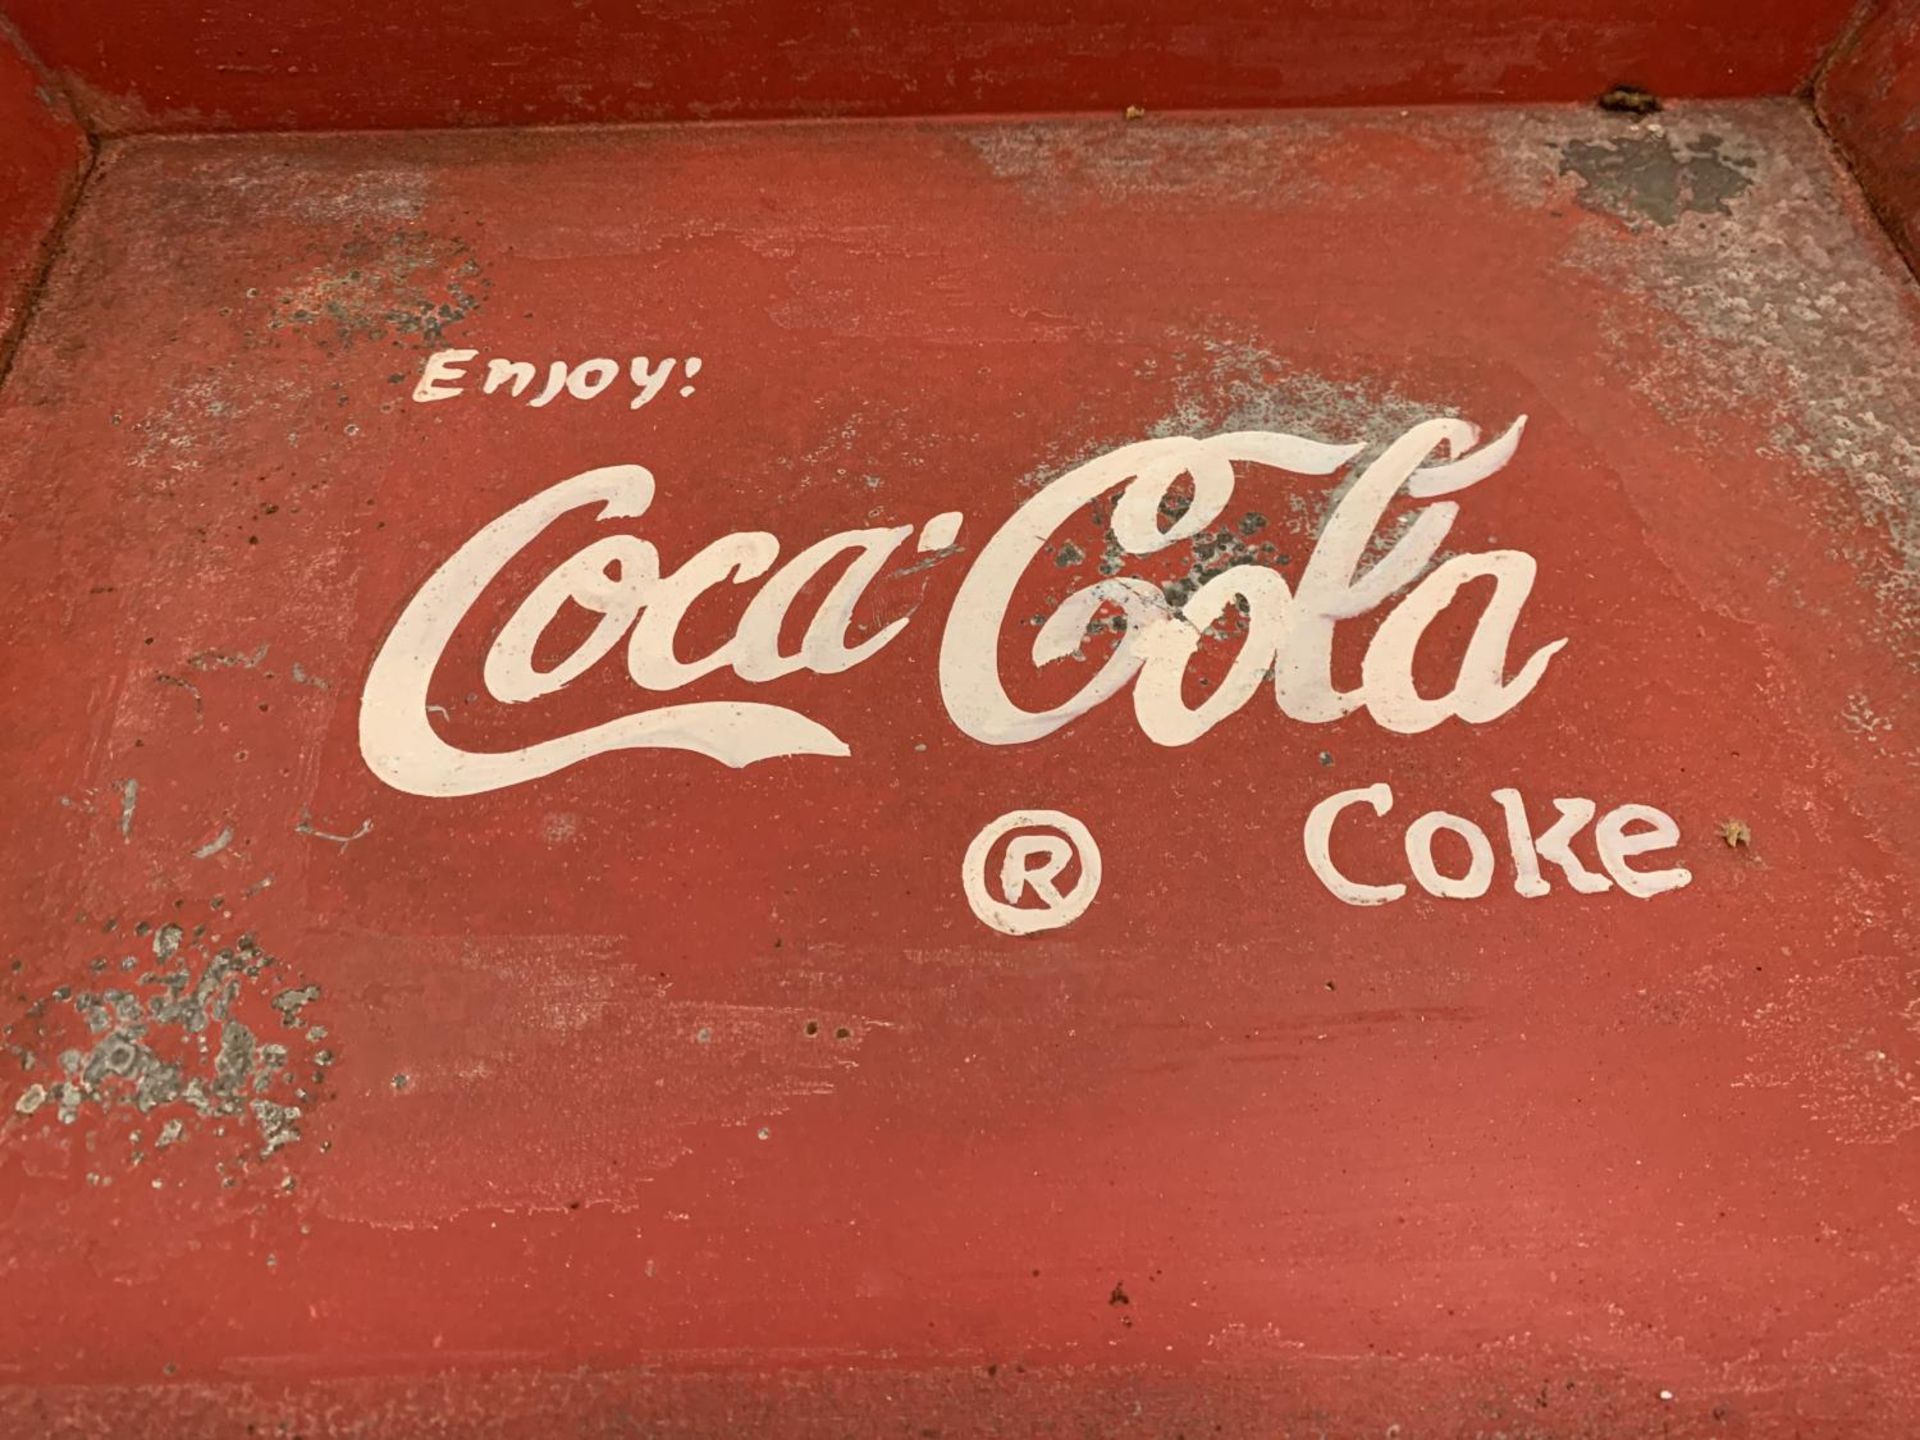 A VINTAGE STYLE COCA COLA ADVERTISING TRAY - Image 2 of 4